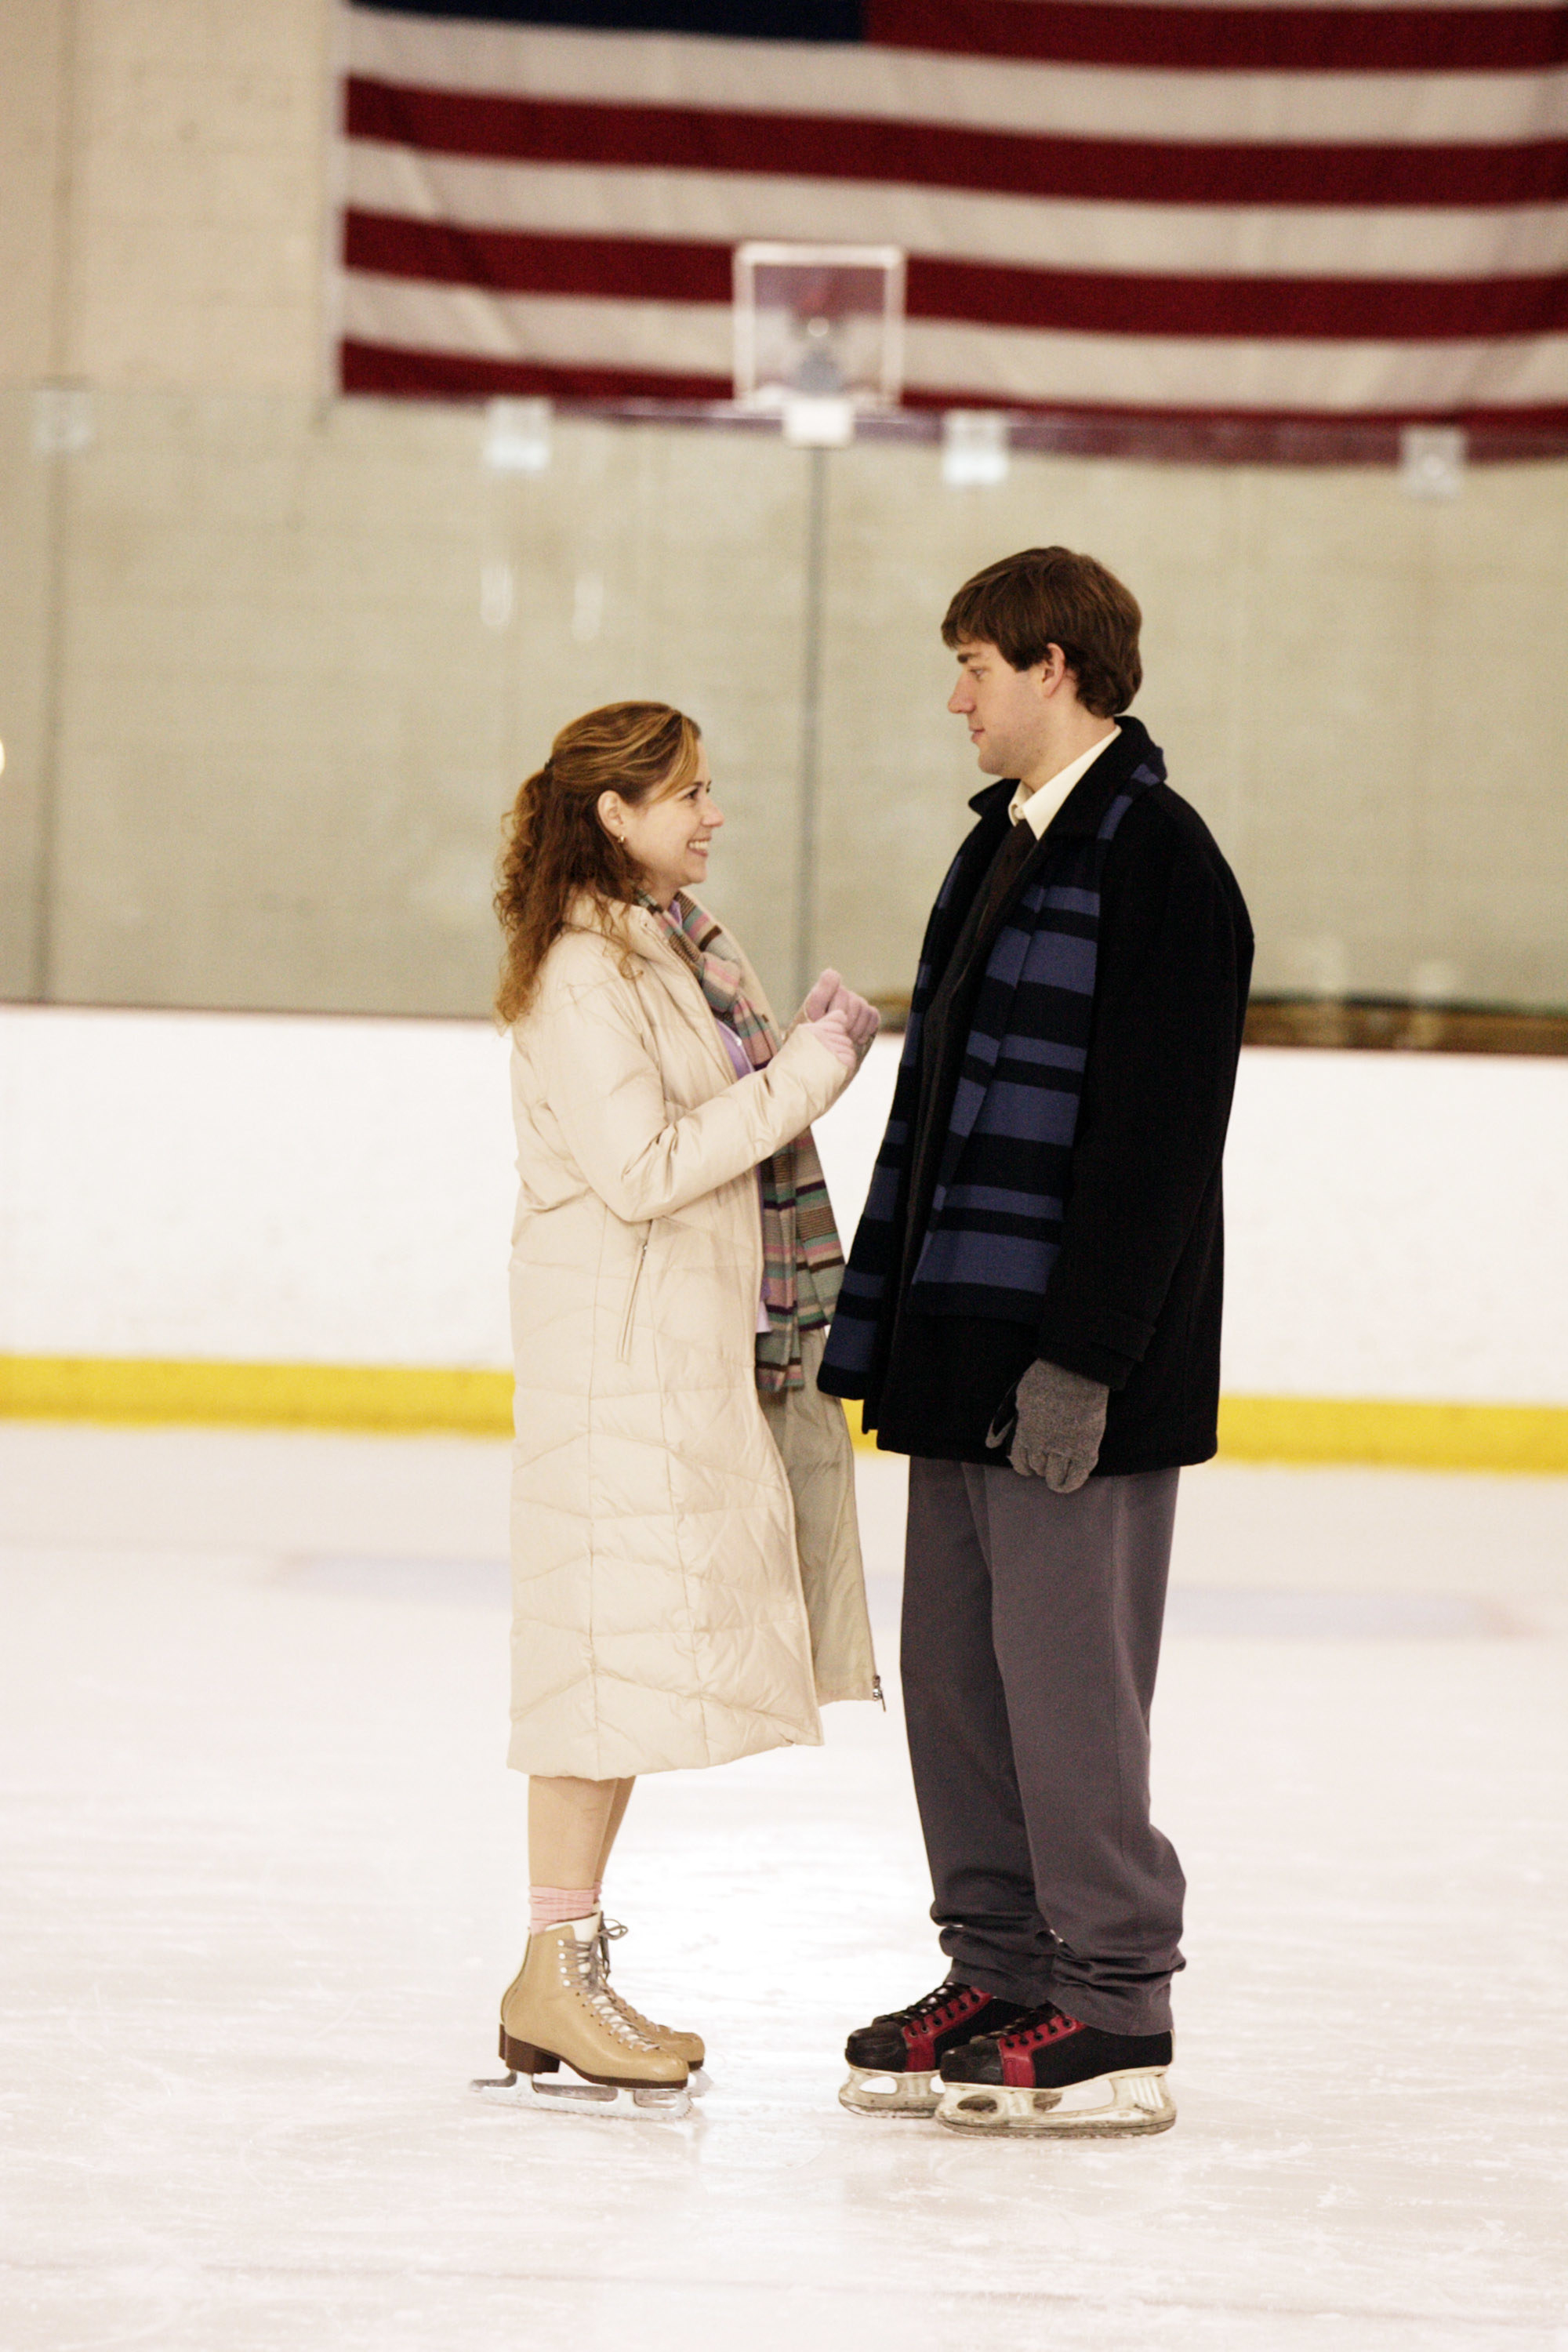 Pam and Jim on an ice skating rink